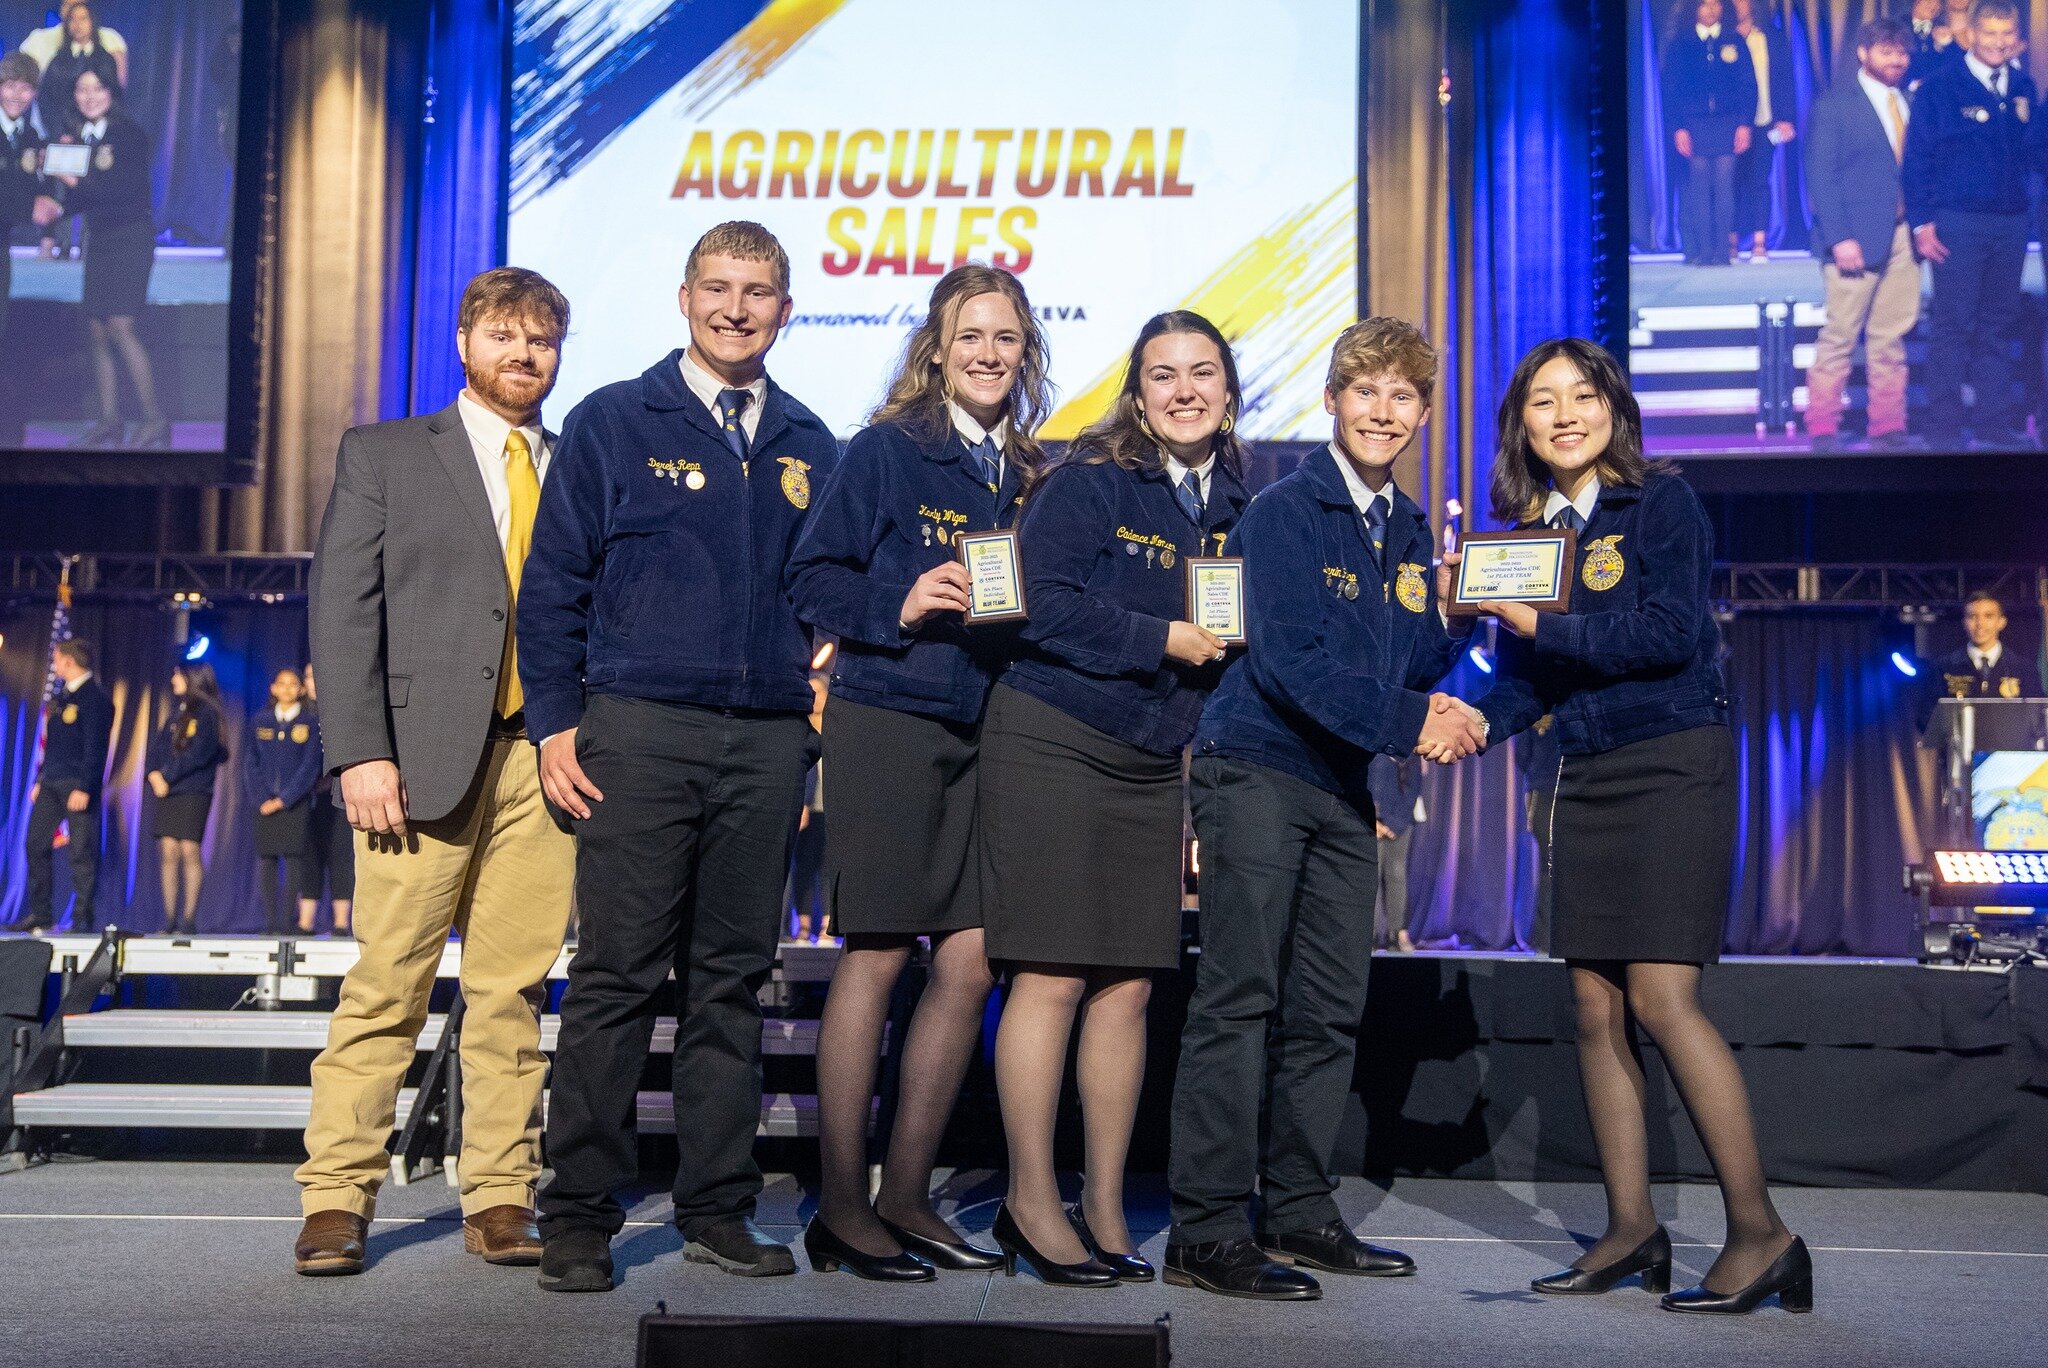 🏆 WINNER UPDATE 🏆

Congratulations to our State Champion Agricultural Sales CDE team, Colfax FFA!✨

Team Results:
&raquo; 2nd :: Lind-Ritzville 1
&raquo; 3rd :: Davenport 1
&raquo; 4th :: Yelm
&raquo; 5th :: Pullman 1
&raquo; 6th :: Ferndale
&raquo